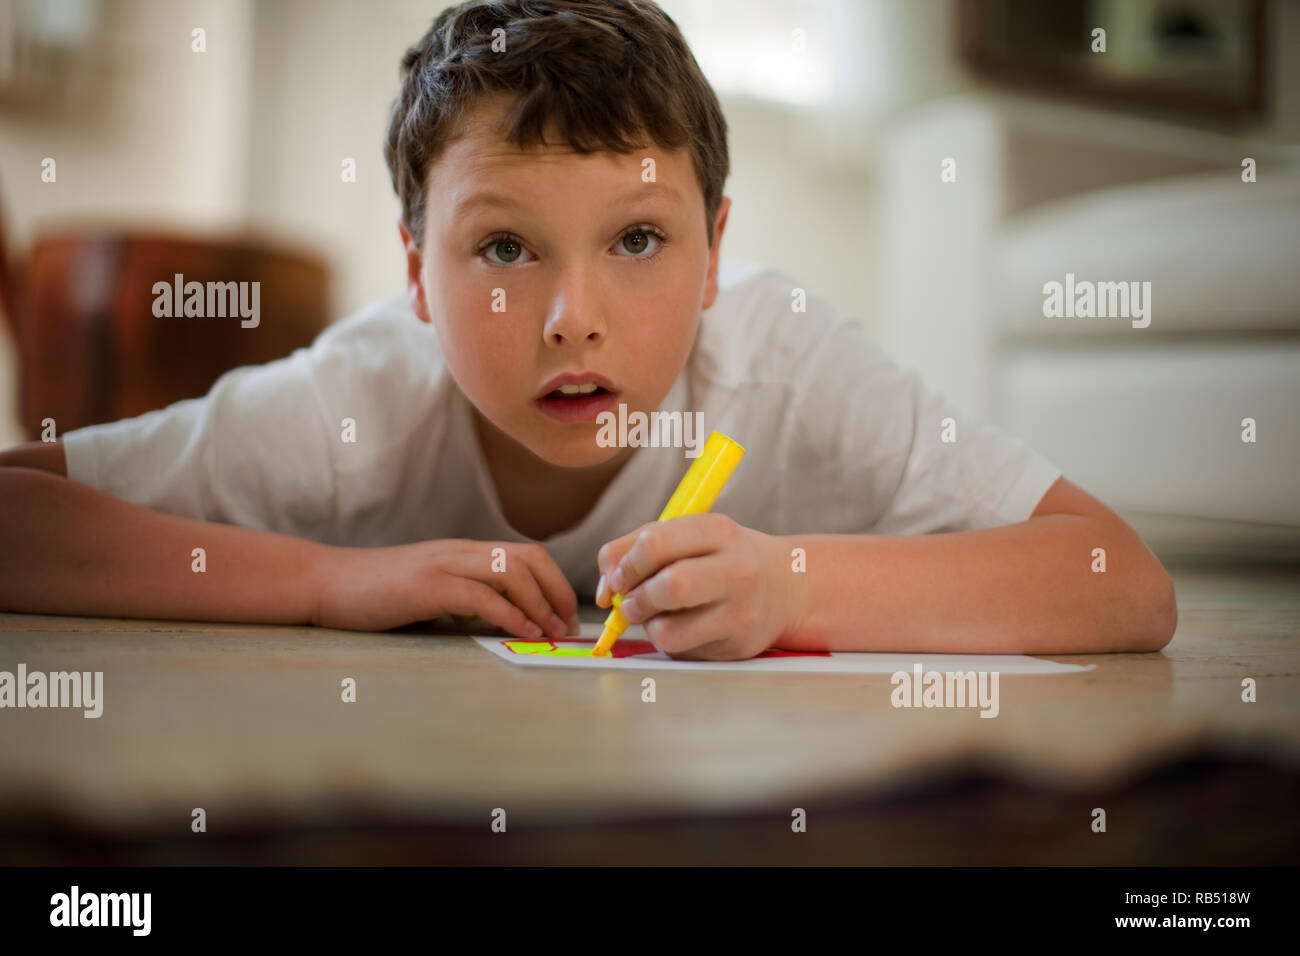 Boy lying down coloring in pictures. Stock Photo